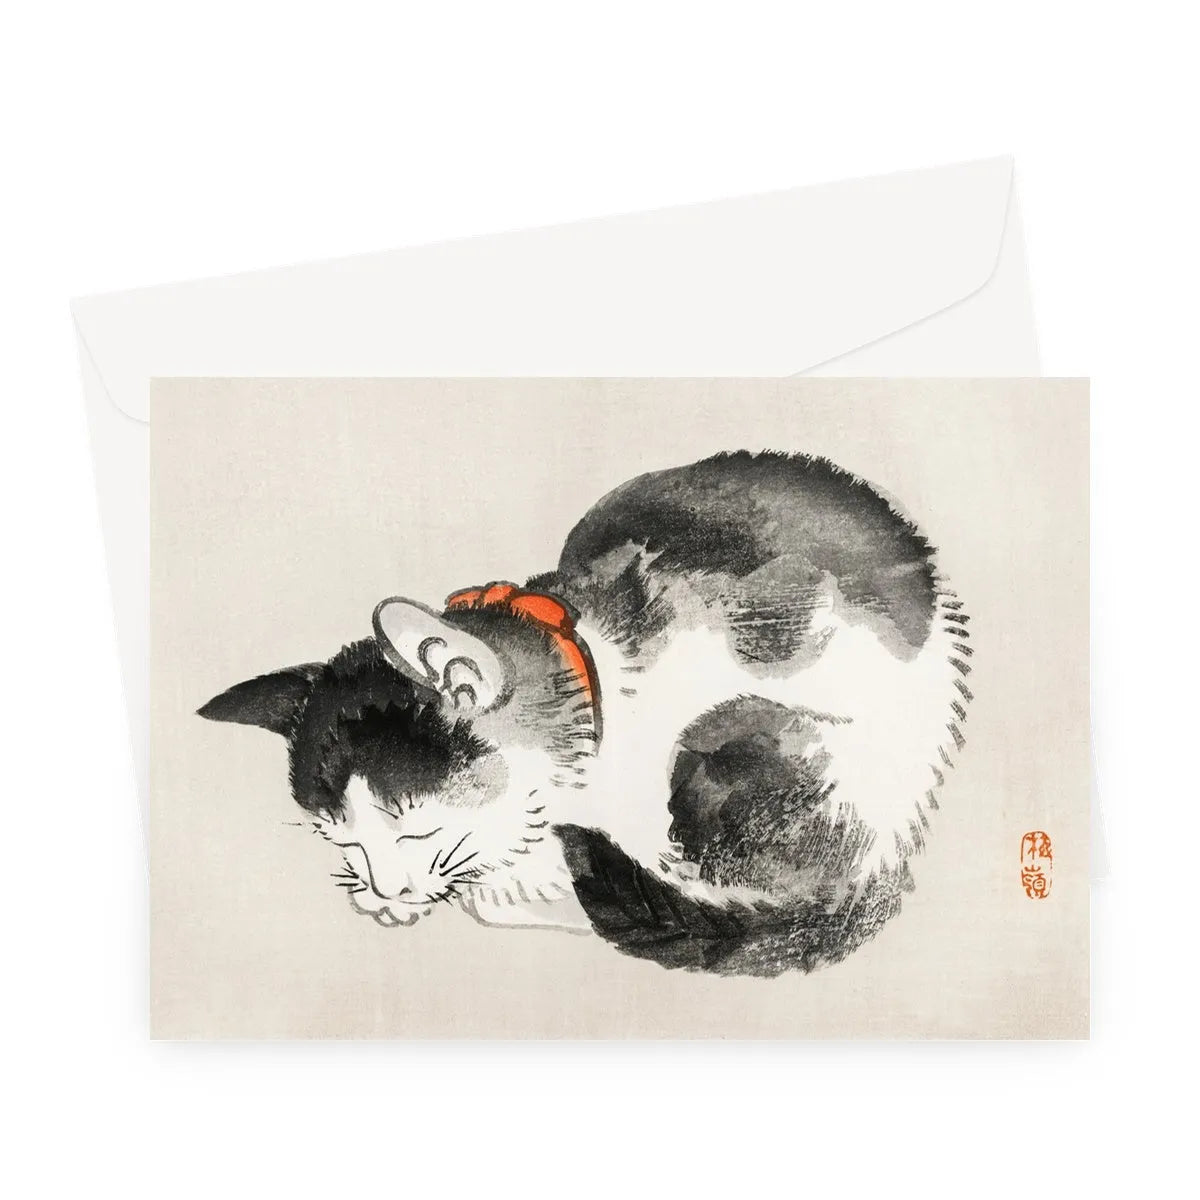 Sleeping Cat By Kōno Bairei Greeting Card - A5 Landscape / 1 Card - Greeting & Note Cards - Aesthetic Art